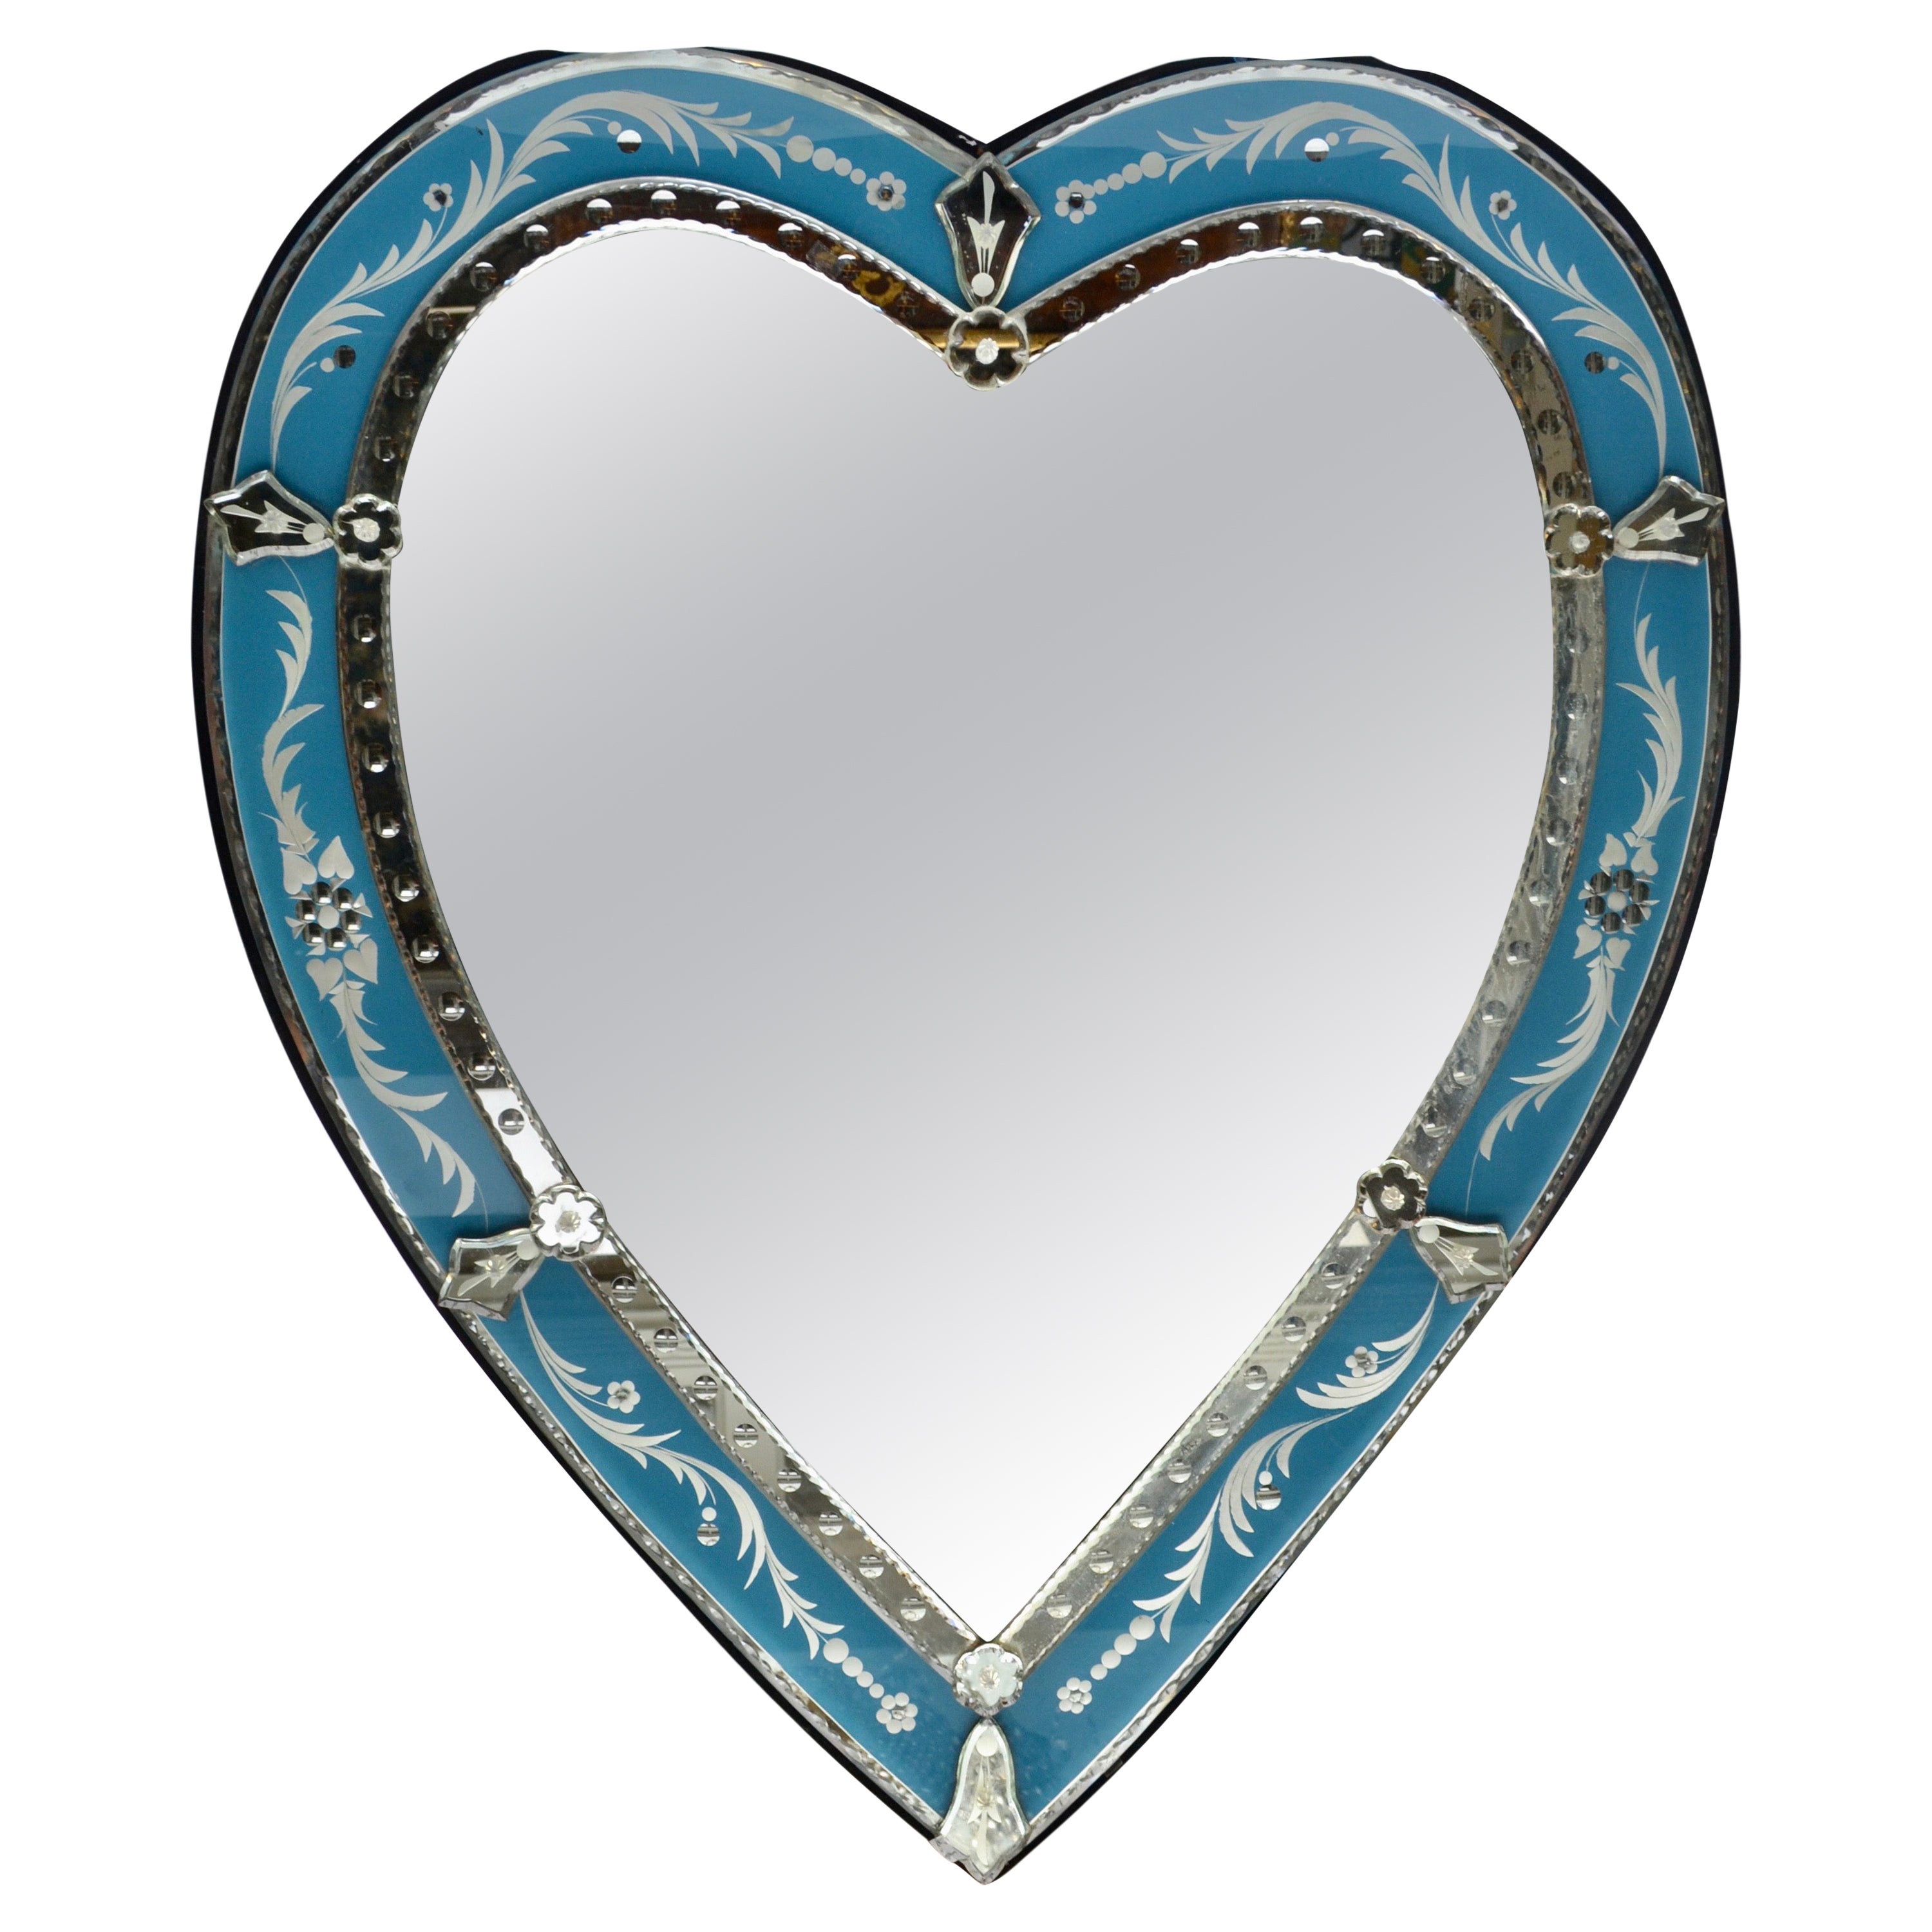 Venetian Heart Shaped Mirror with Etched Blue Glass Border